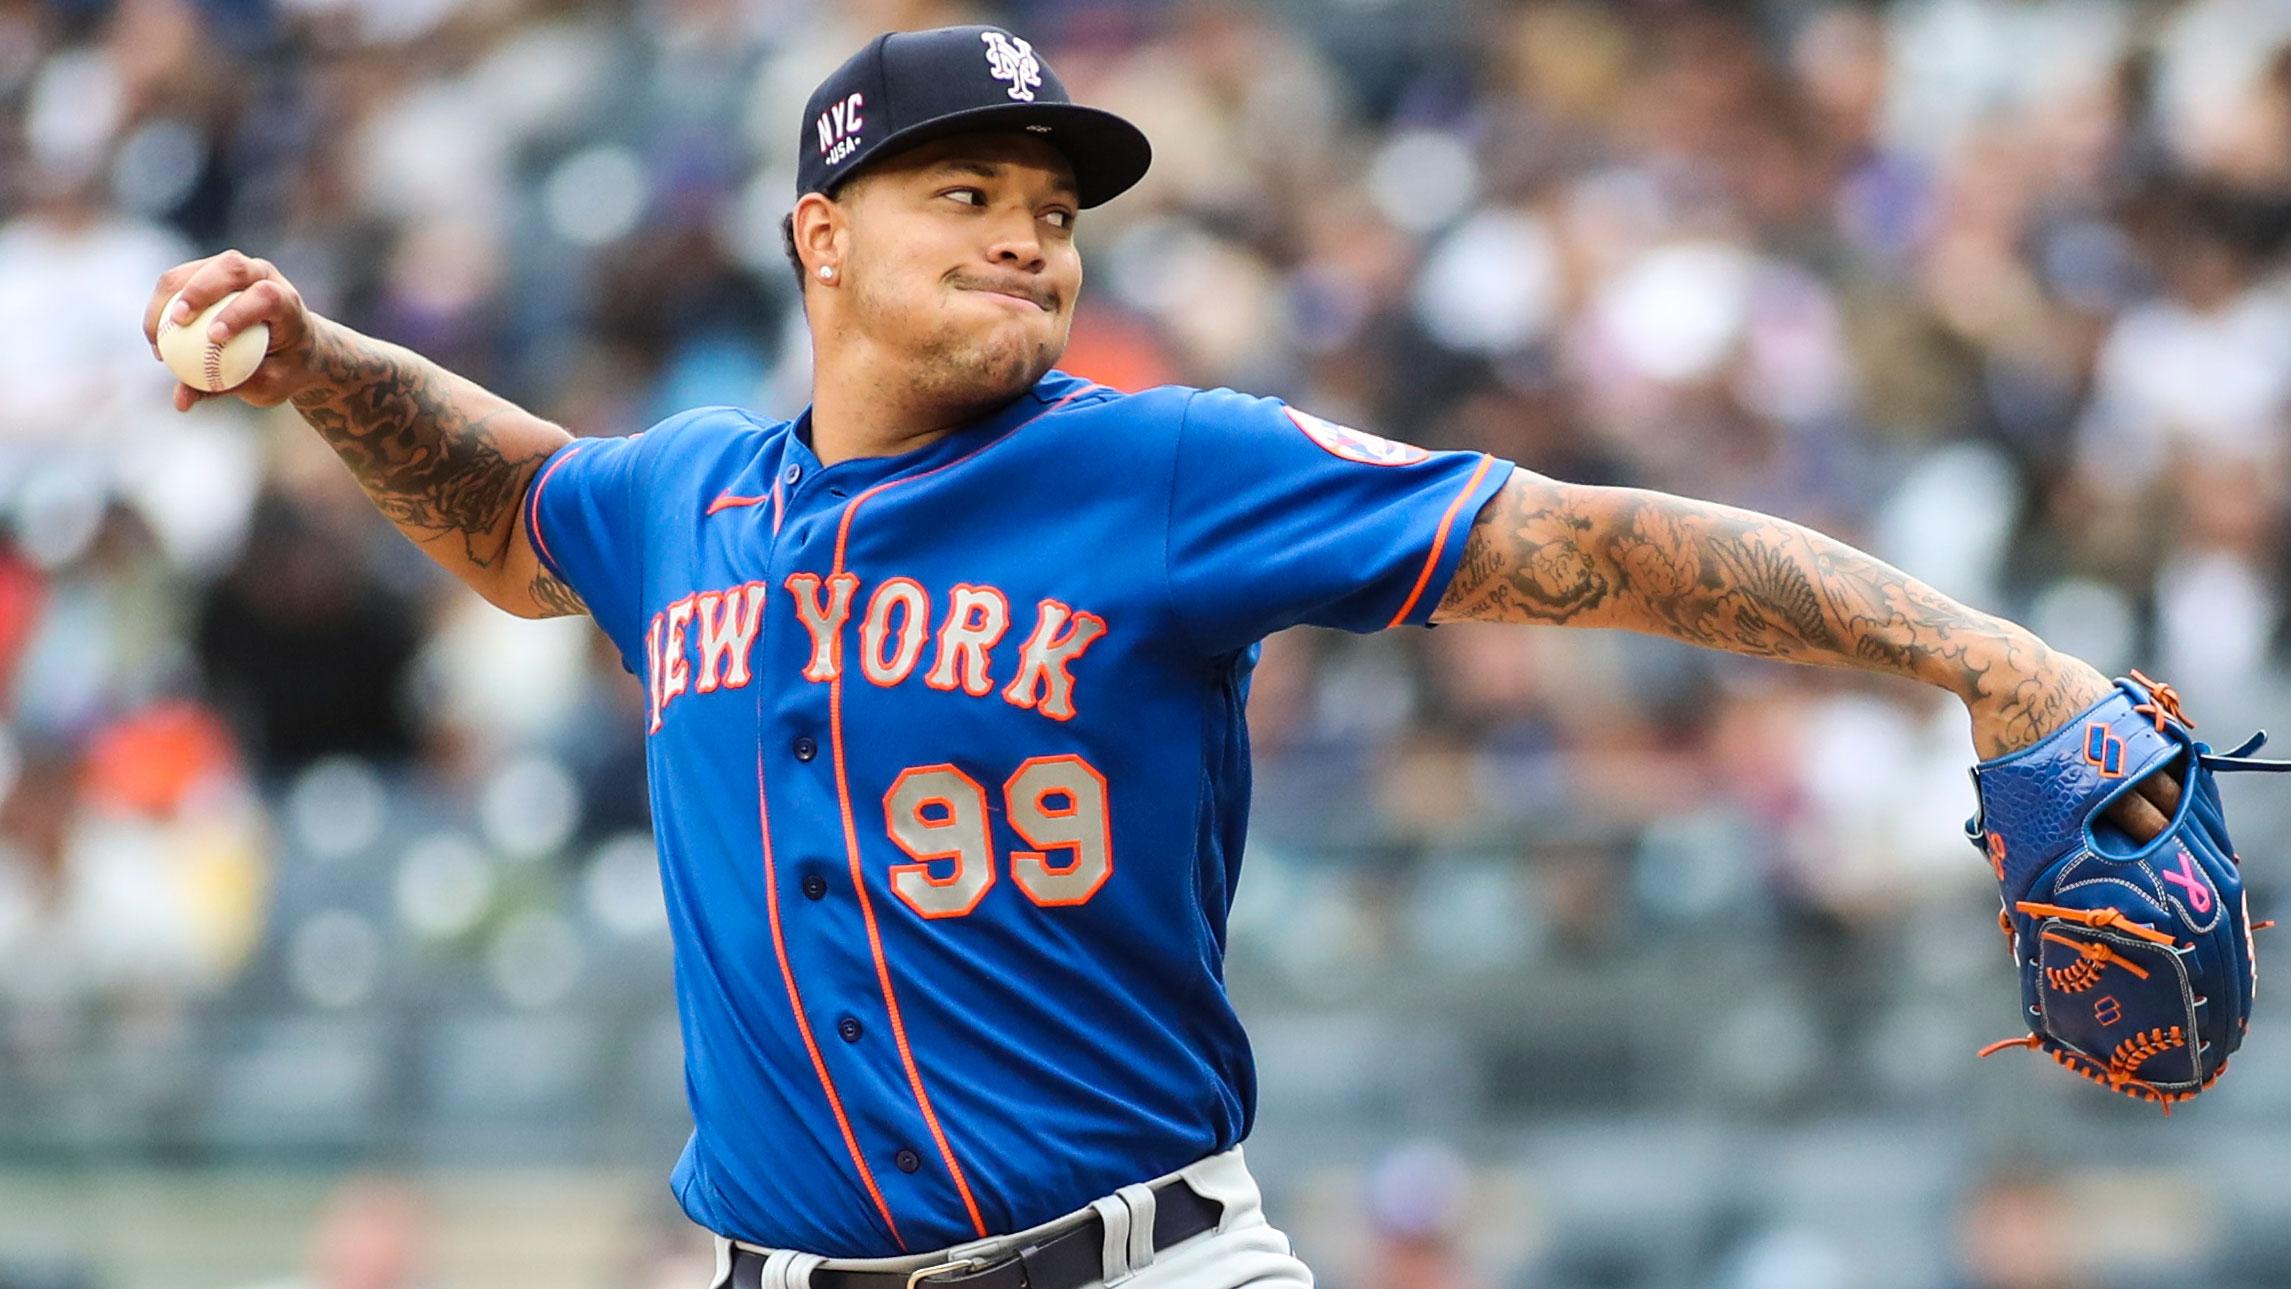 Jul 3, 2021; Bronx, New York, USA; New York Mets pitcher Taijuan Walker (99) pitches in the second inning against the New York Yankees at Yankee Stadium. / Wendell Cruz-USA TODAY Sports